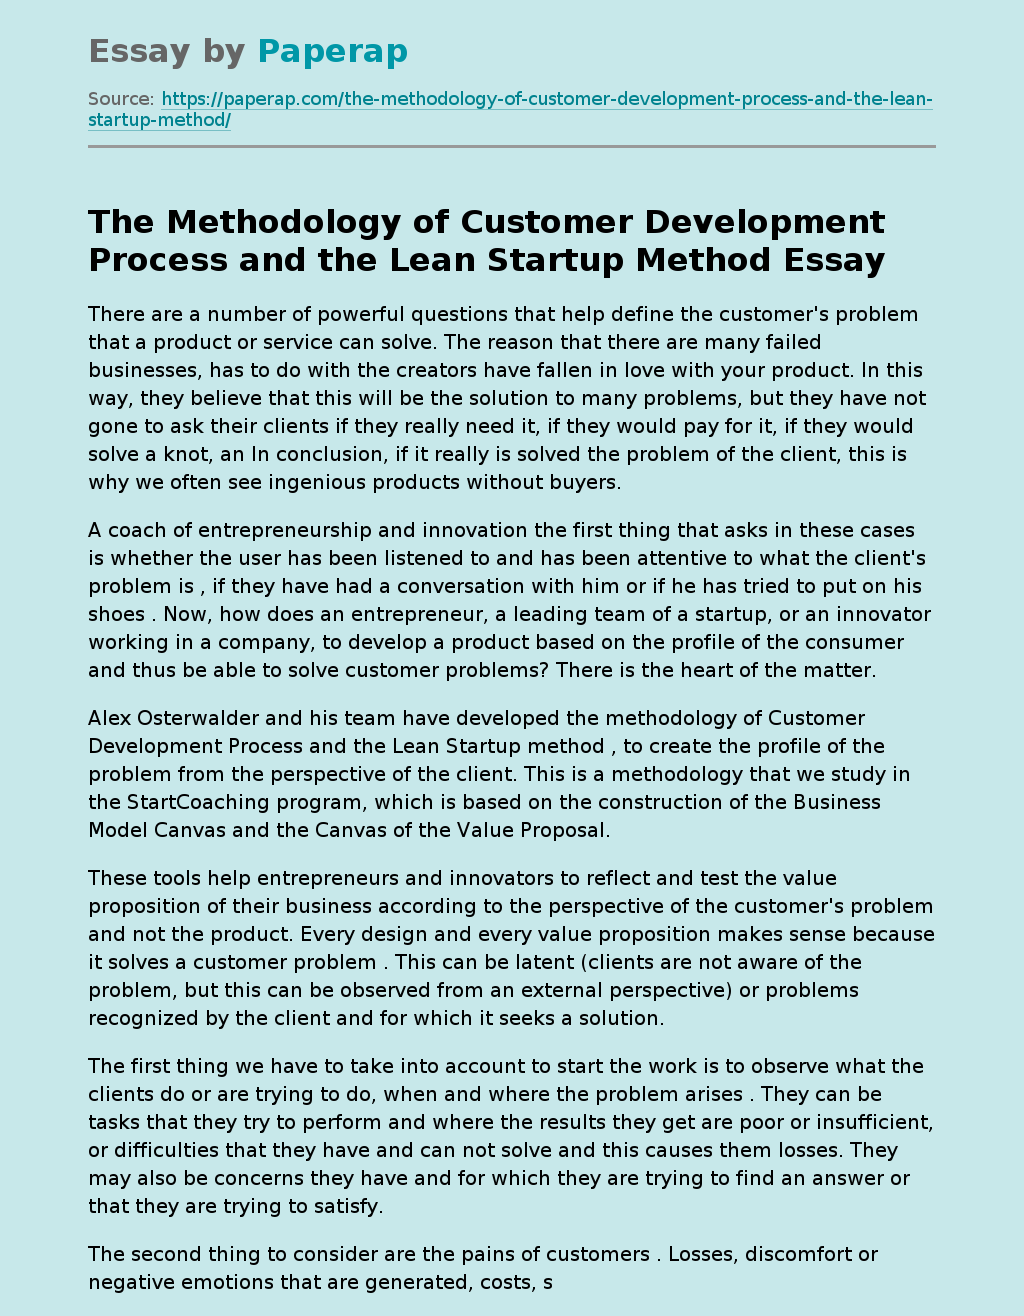 The Methodology of Customer Development Process and the Lean Startup Method